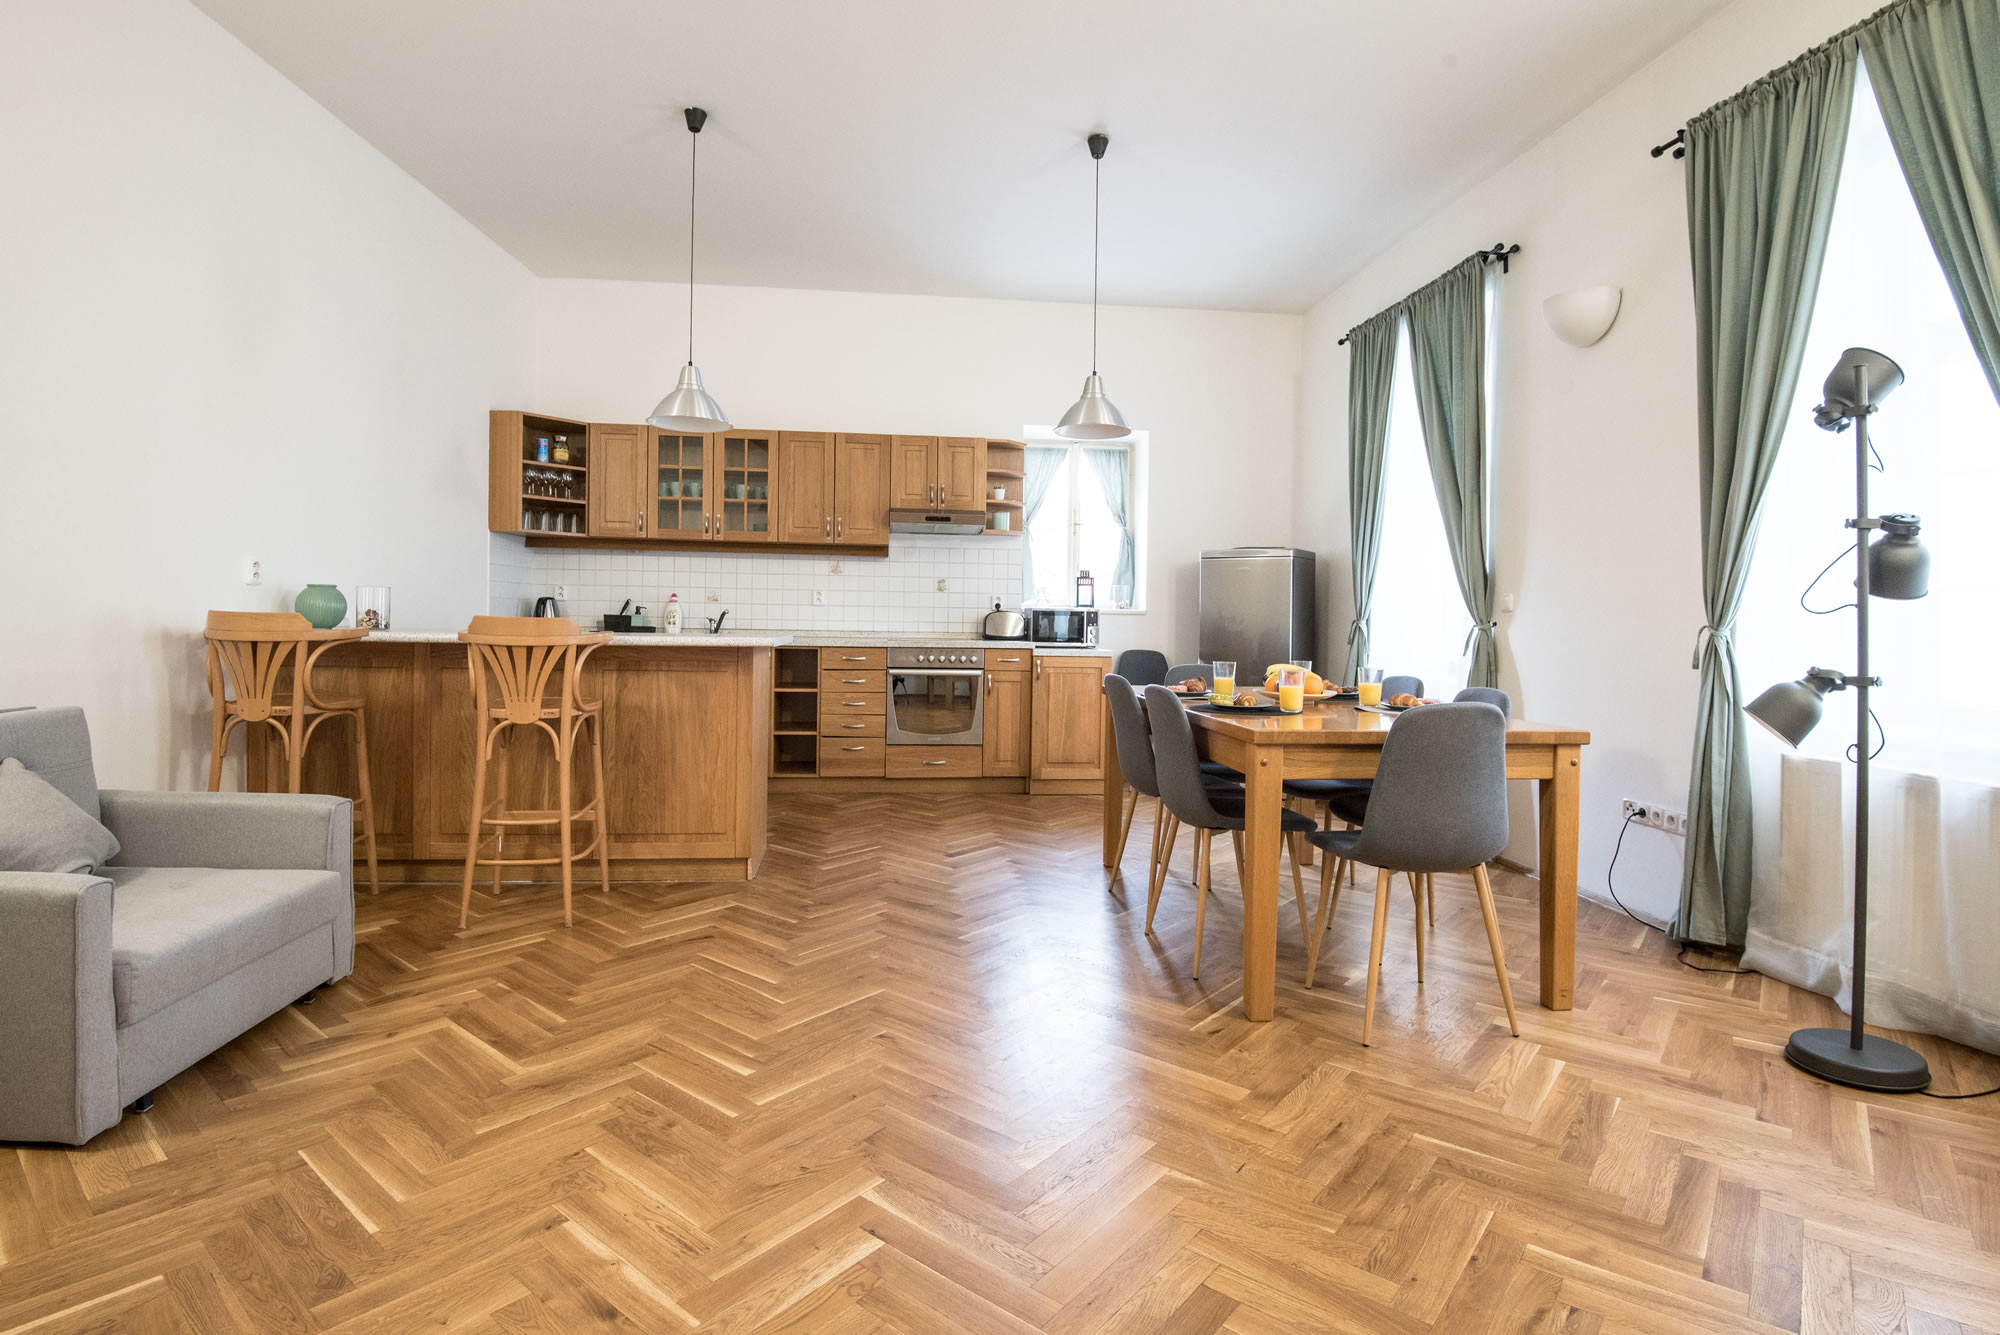 Duplex apartment with spacious kitchen, large dining table and a sofa chair